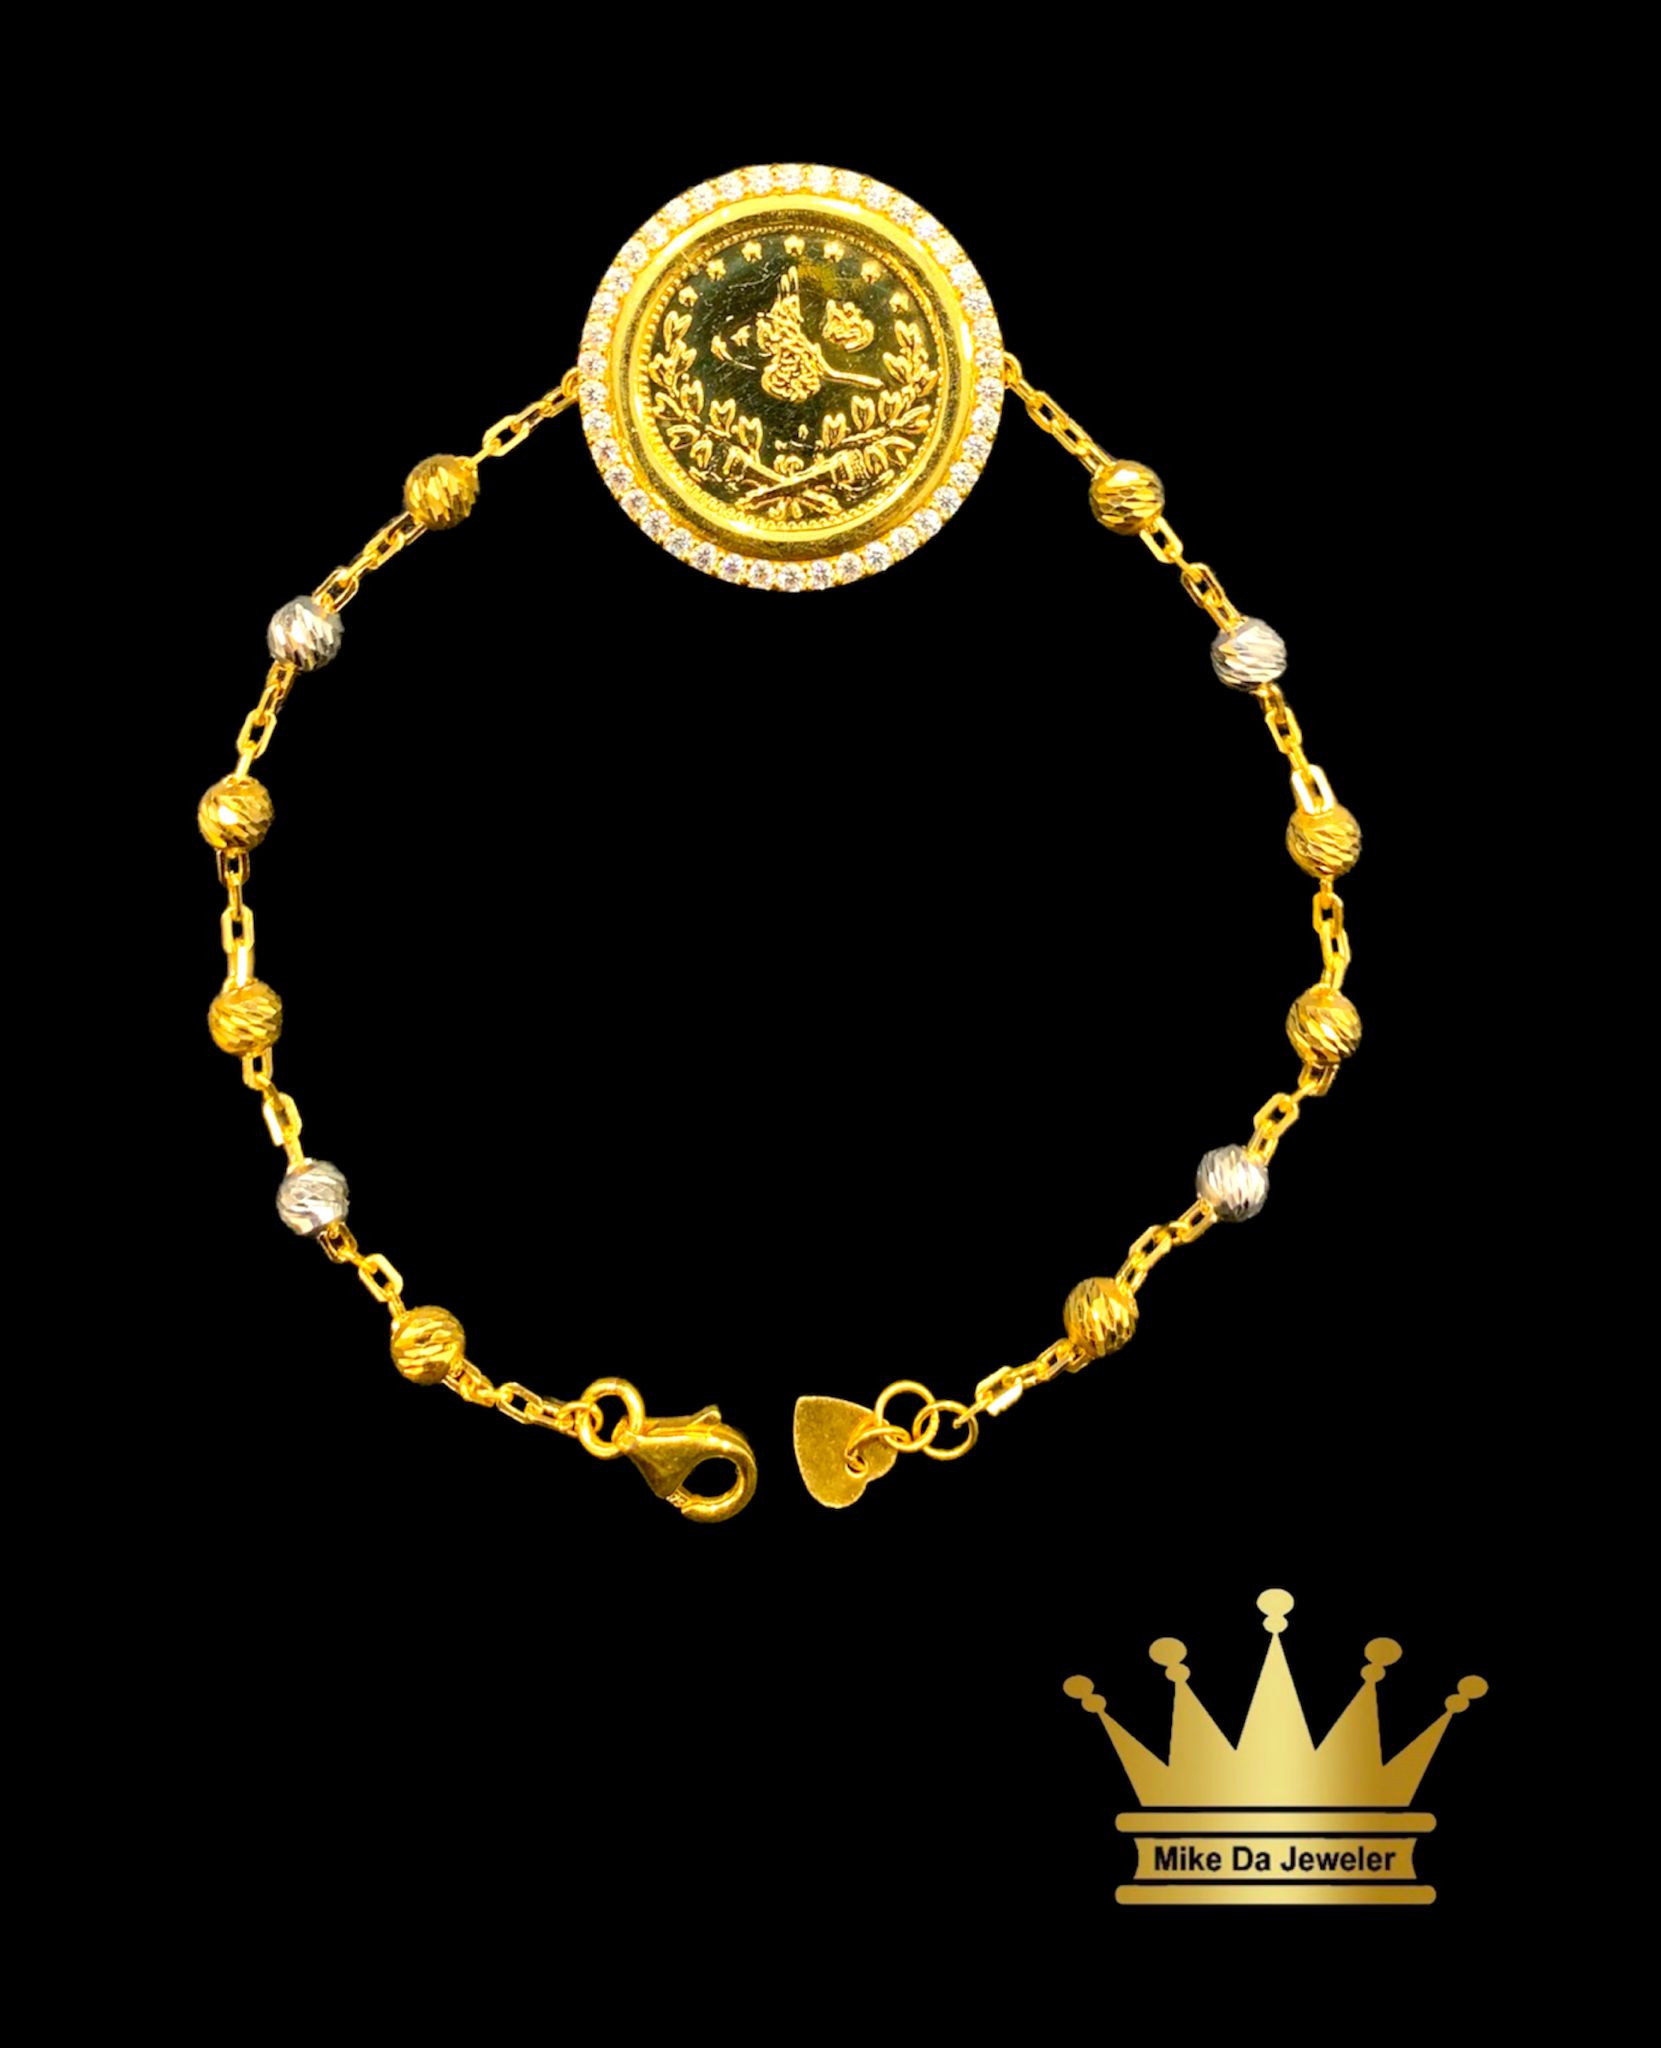 21 k yellow and white gold with cubic zirconia Kuwait gold coin bracelet size 7.5 inch weight 7.770mg  price $820